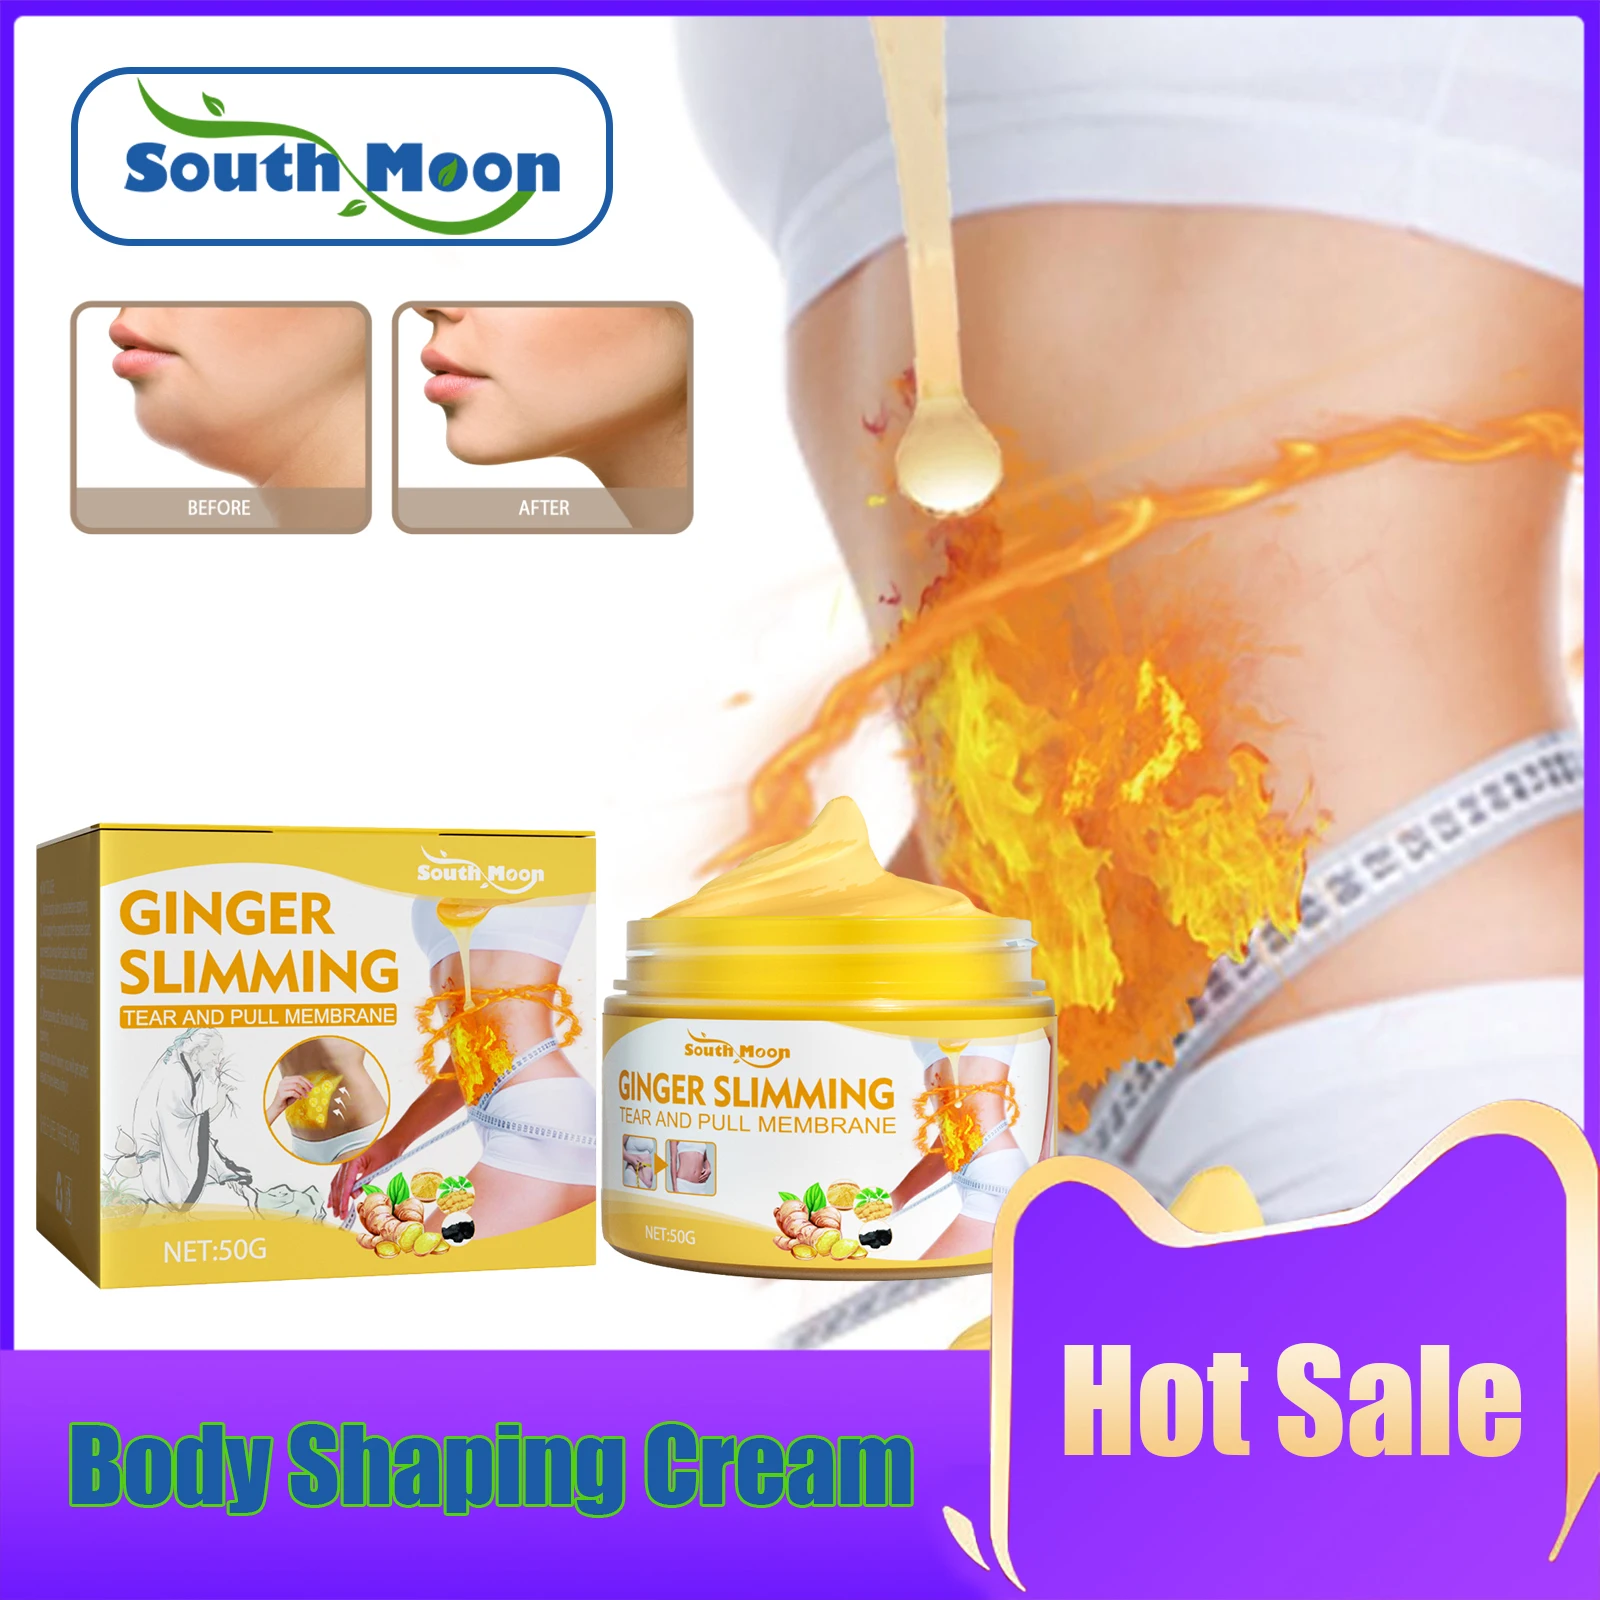 

Ginger Slimming Cream Fat Burning Weight Loss Anti Waist Belly Legs Cellulite Detox Shaping Muscle Relaxation Body Firming Cream